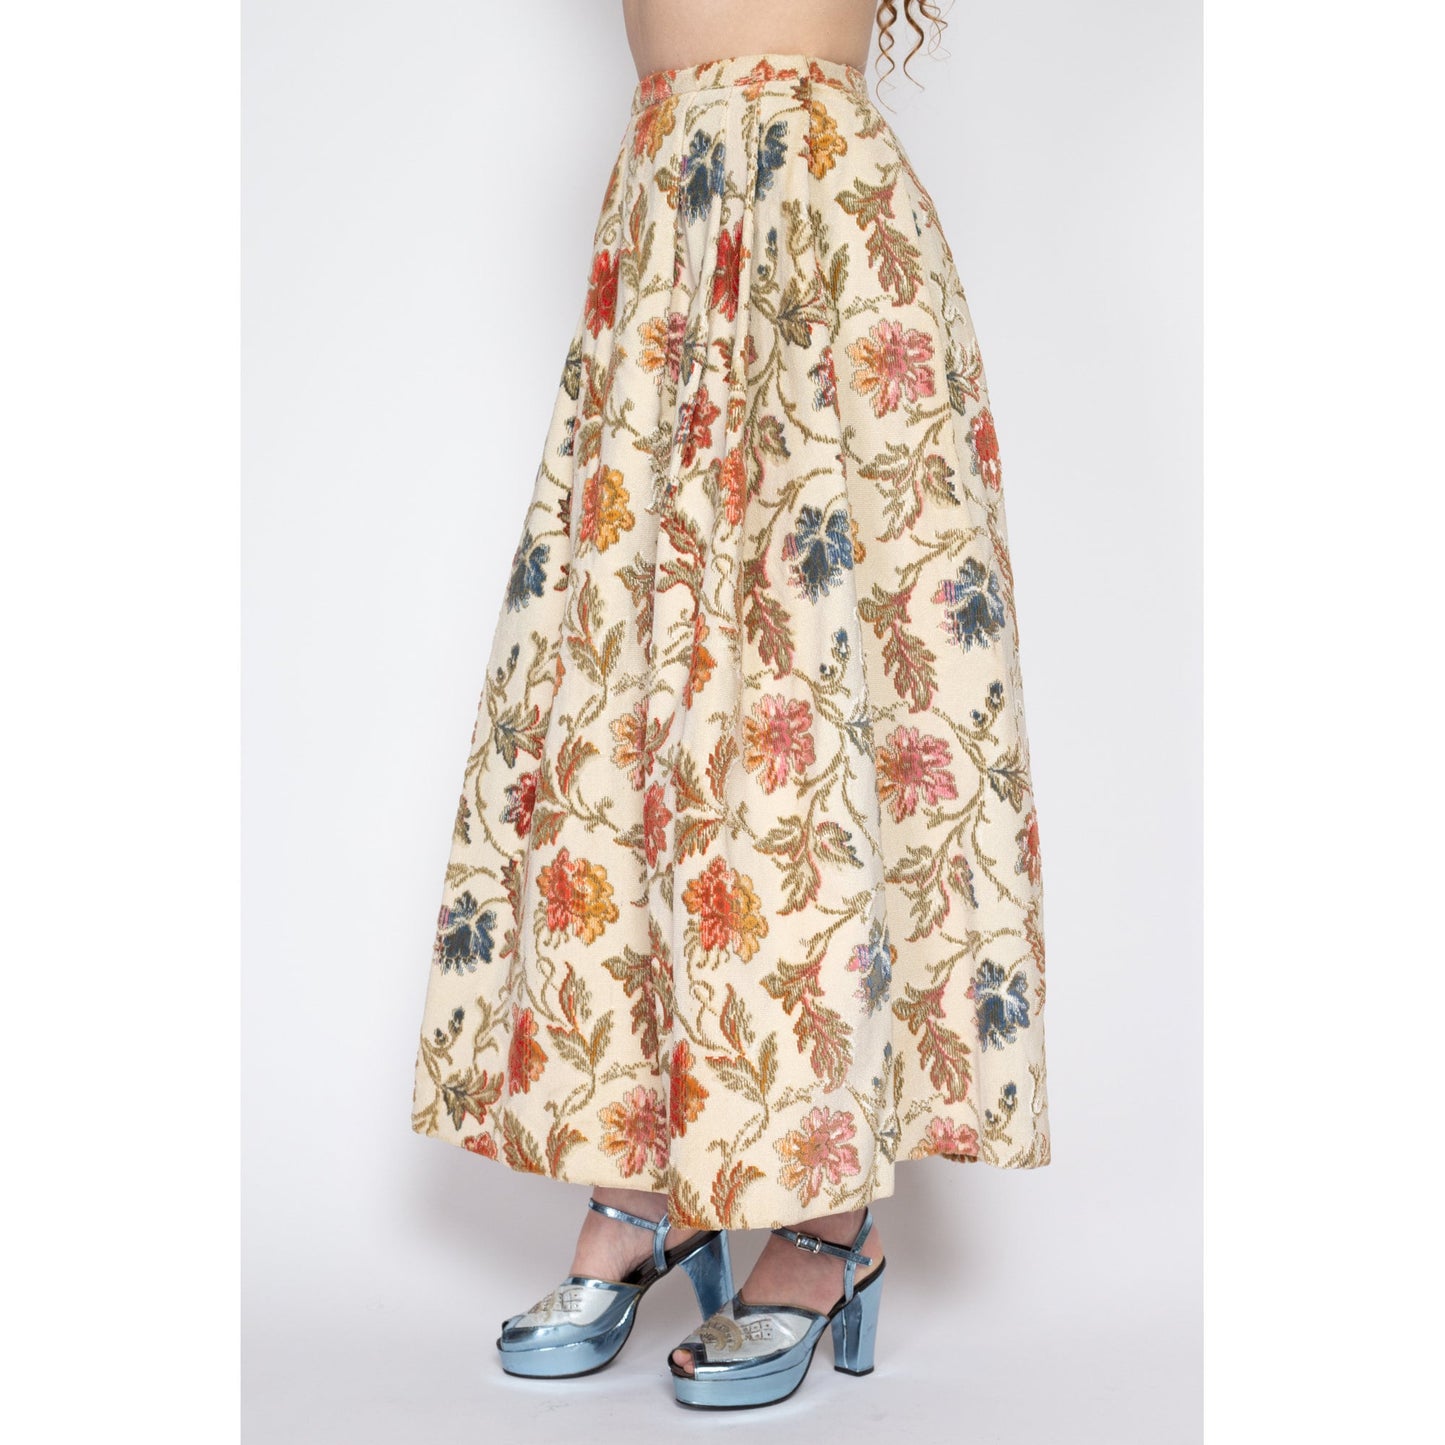 Small 1960s Floral Tapestry Maxi Skirt NWT | Vintage 60s Mr. Gee Melba Hobson High Waisted A Line Carpet Skirt